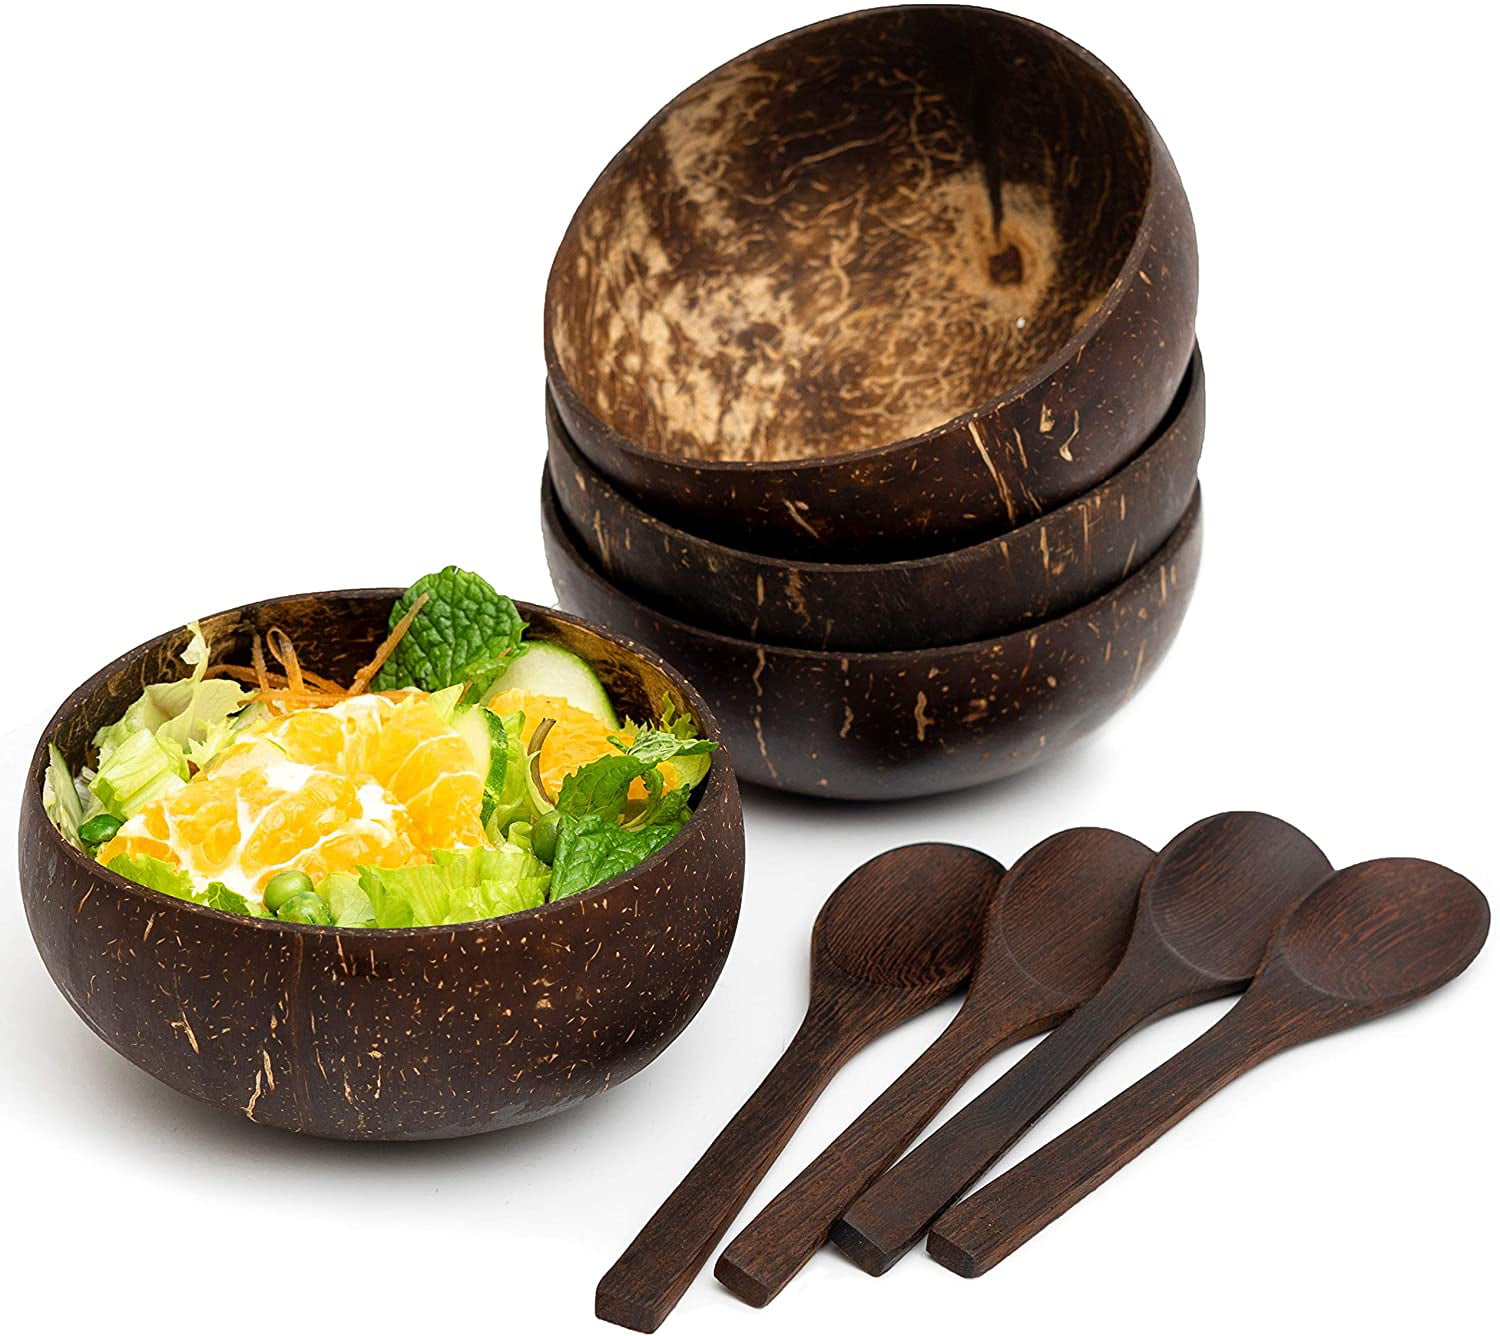 Polished With Oil, - 100% Natural Hand Made Coconut Bowl And Spoon Set Of 4 